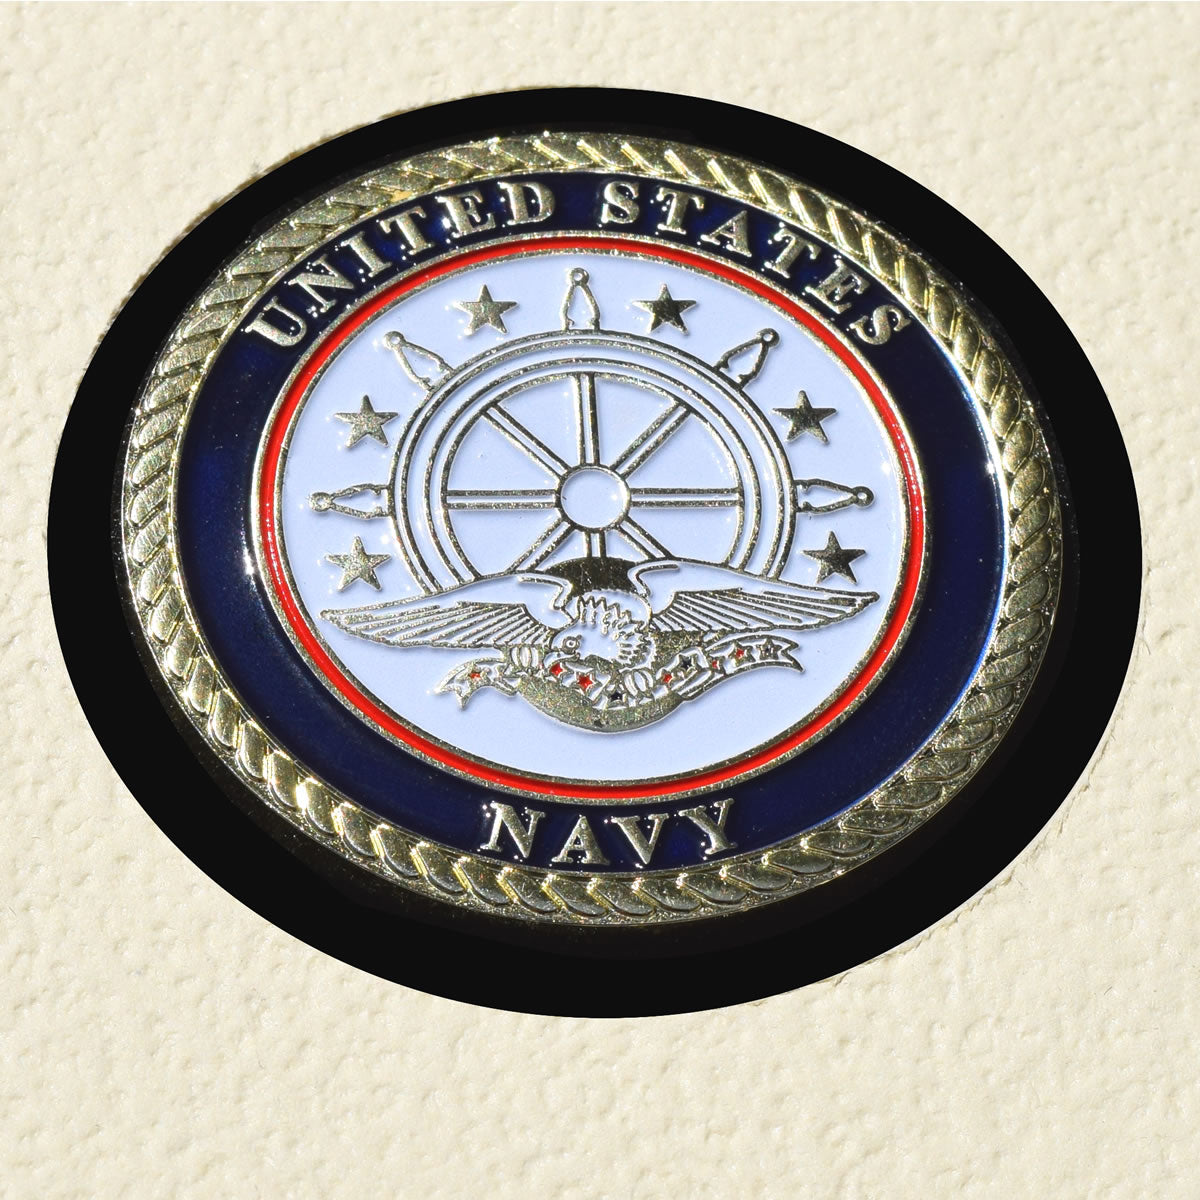 USS NORRIS DD-859 Detailed Coin